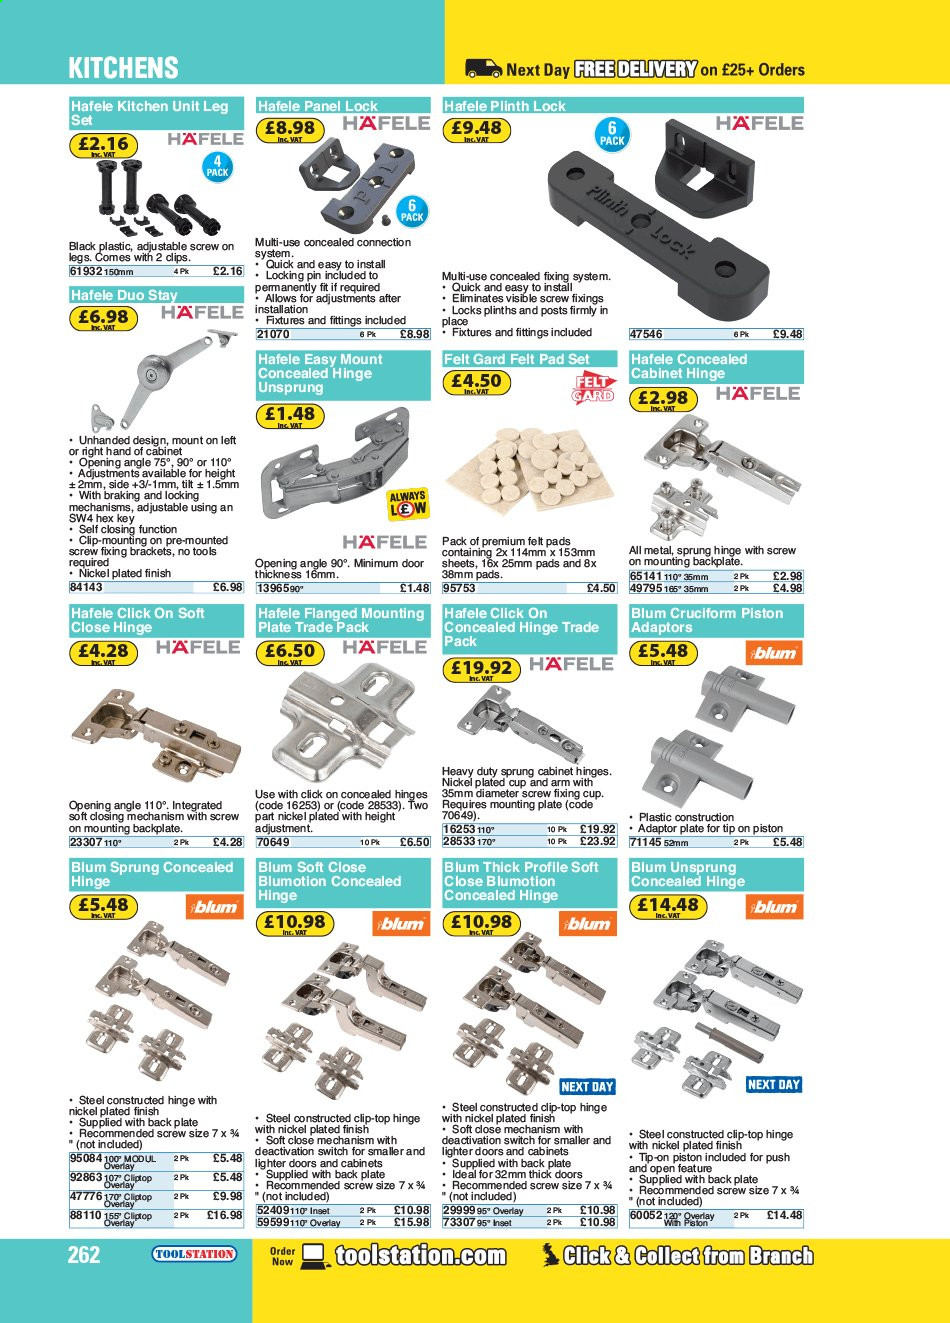 Toolstation offer . Page 262.